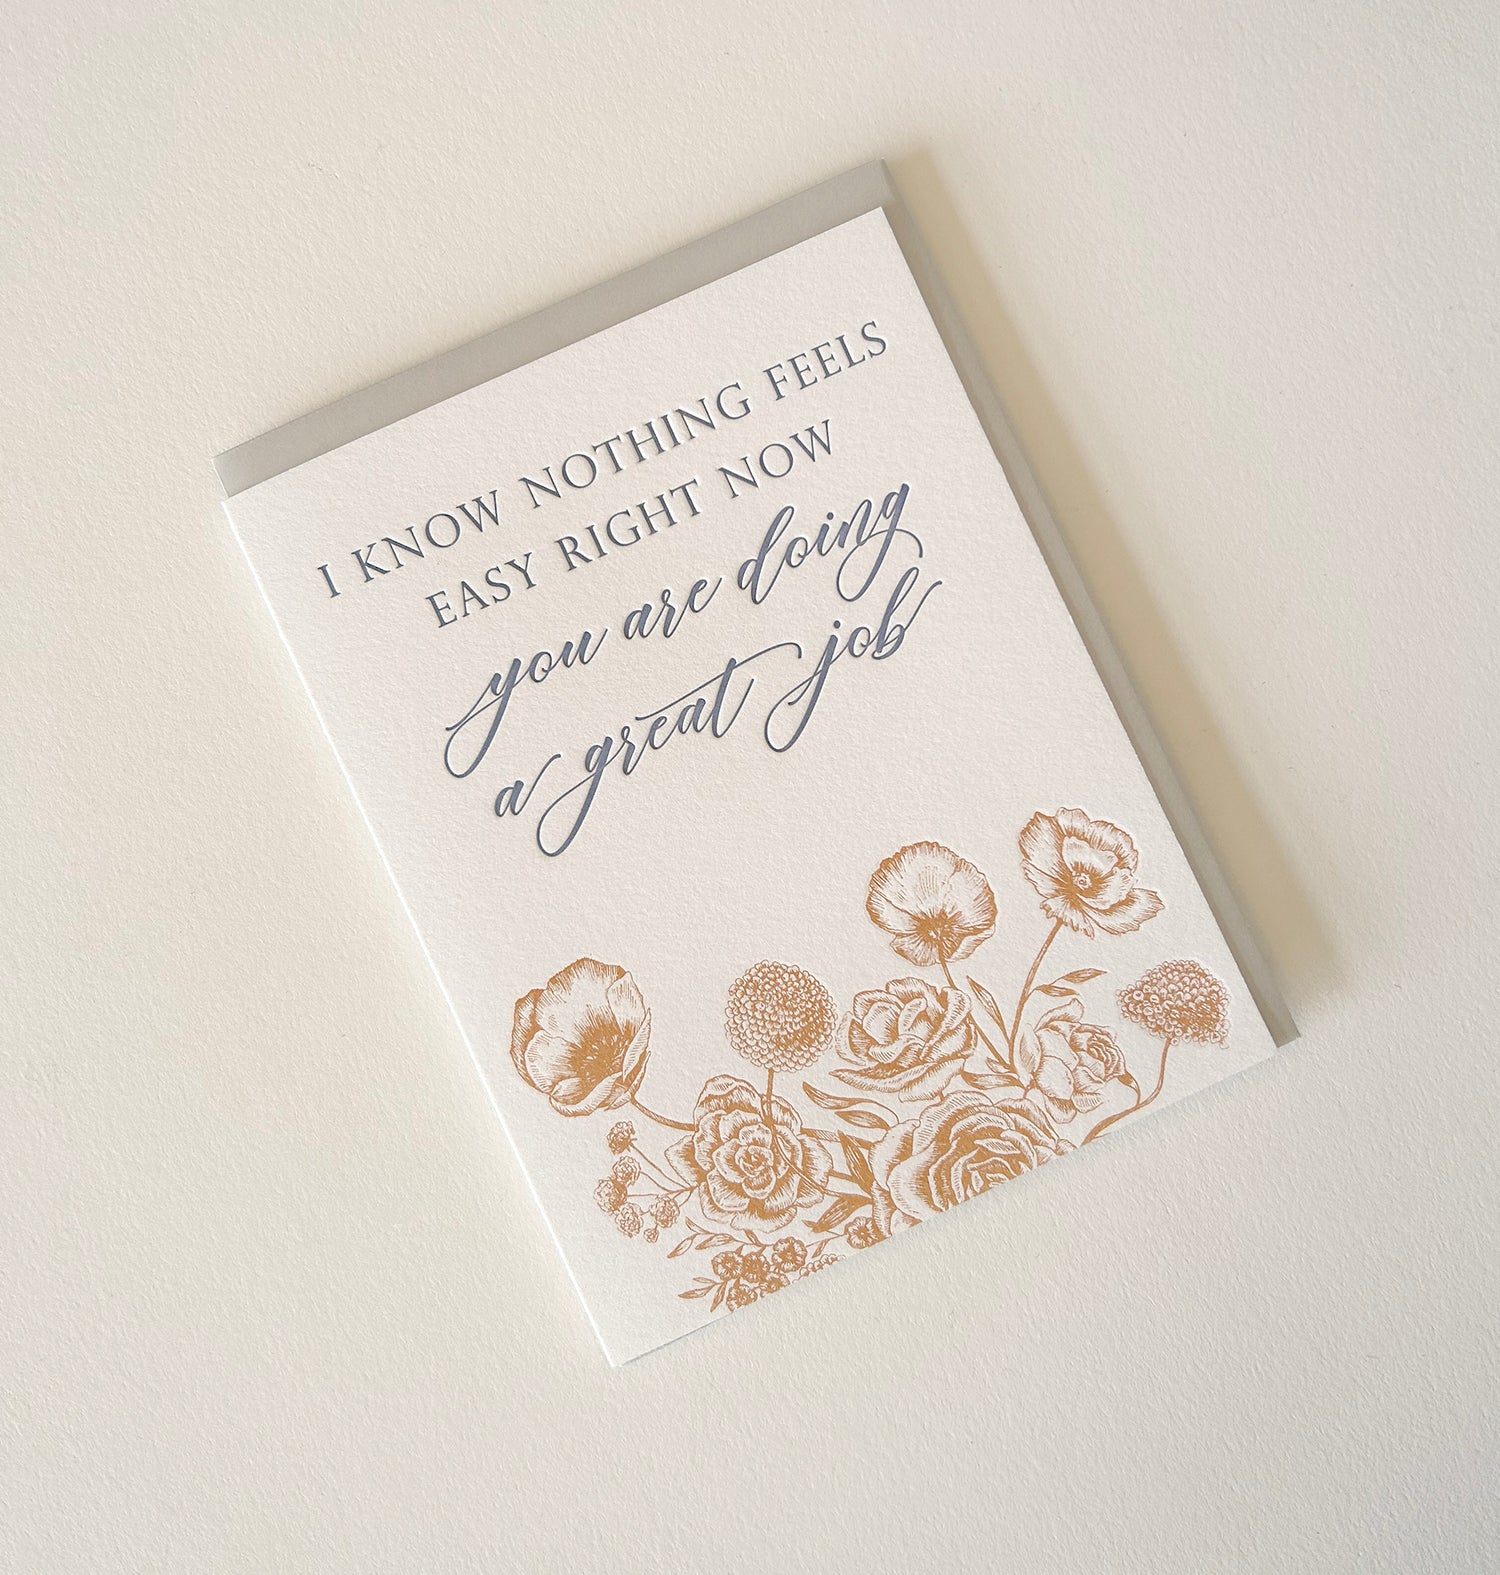 Letterpress encouragement card with florals that says " I know nothing feels easy right now you are doing a great job" by Rust Belt Love